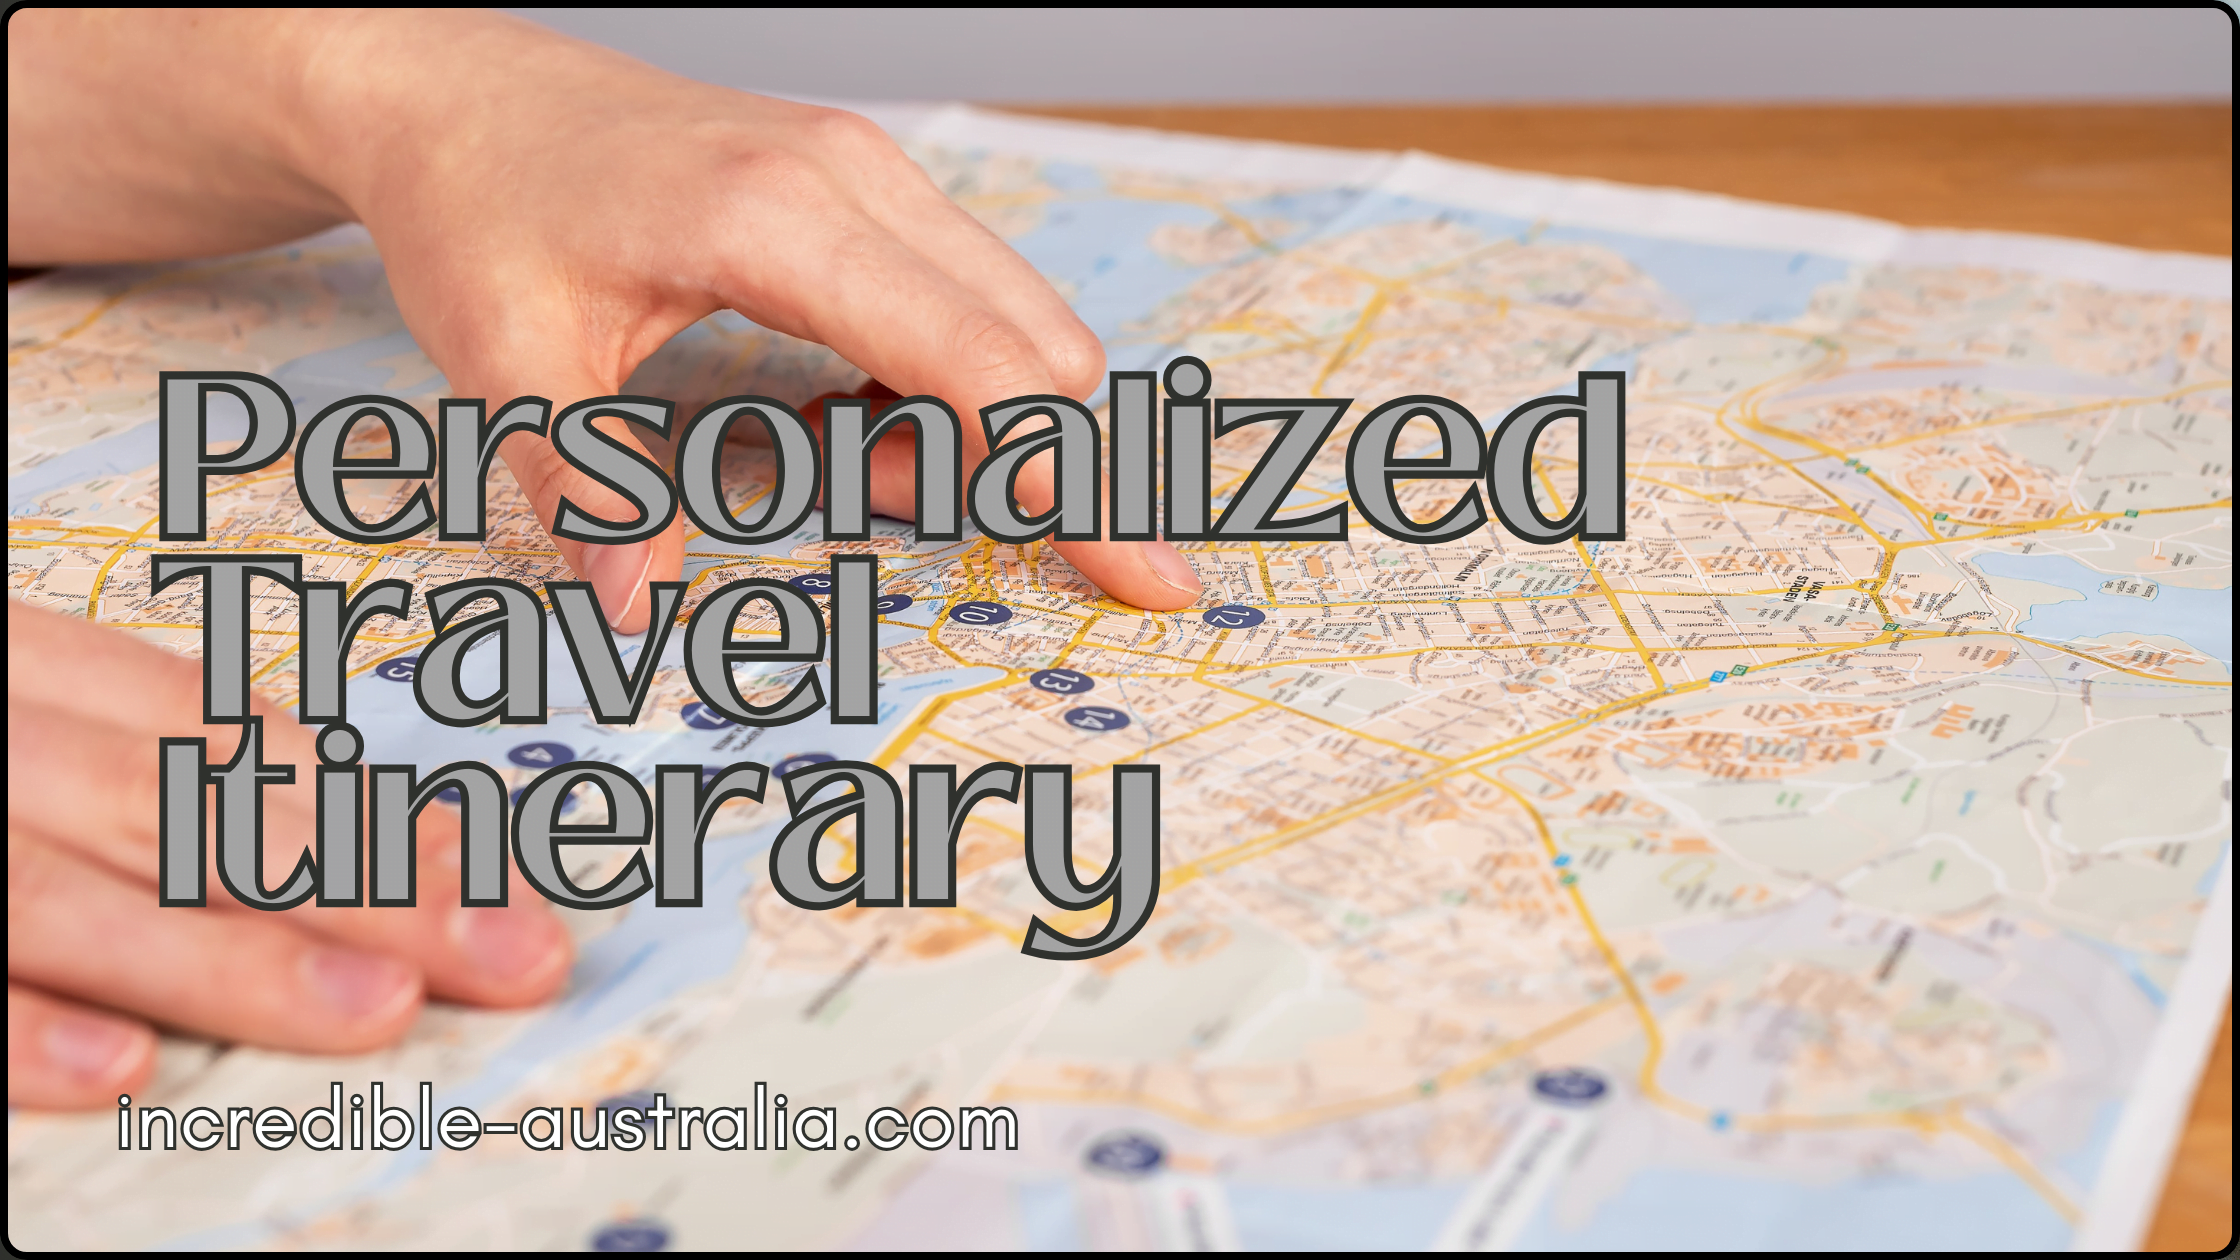 Personalized Travel Itinerary